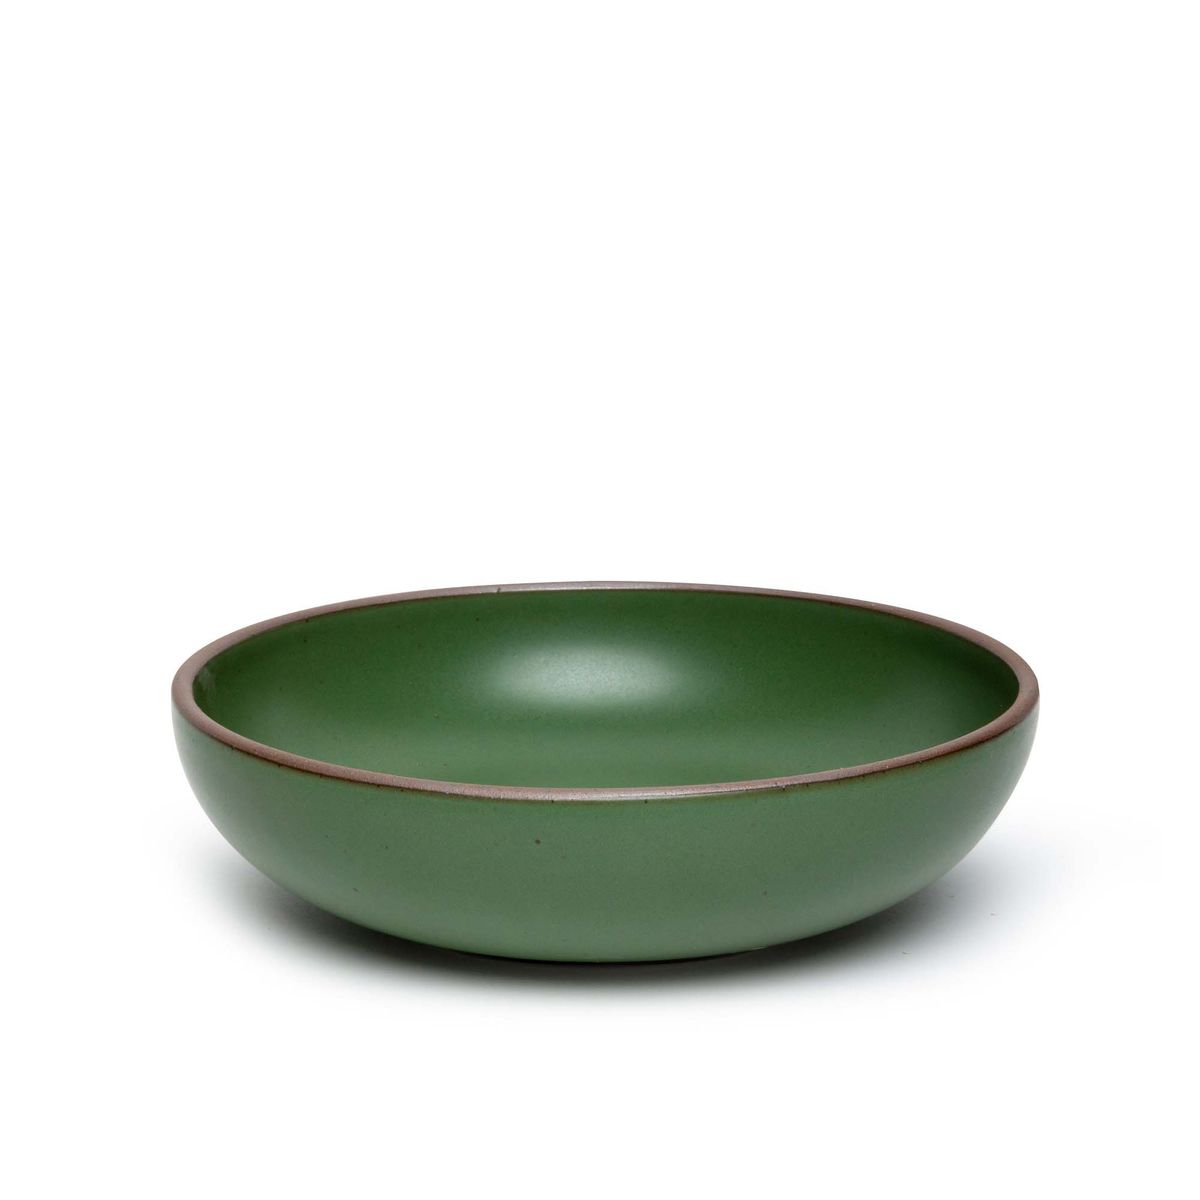 A large shallow serving ceramic bowl in a deep, verdant green color featuring iron speckles and an unglazed rim.